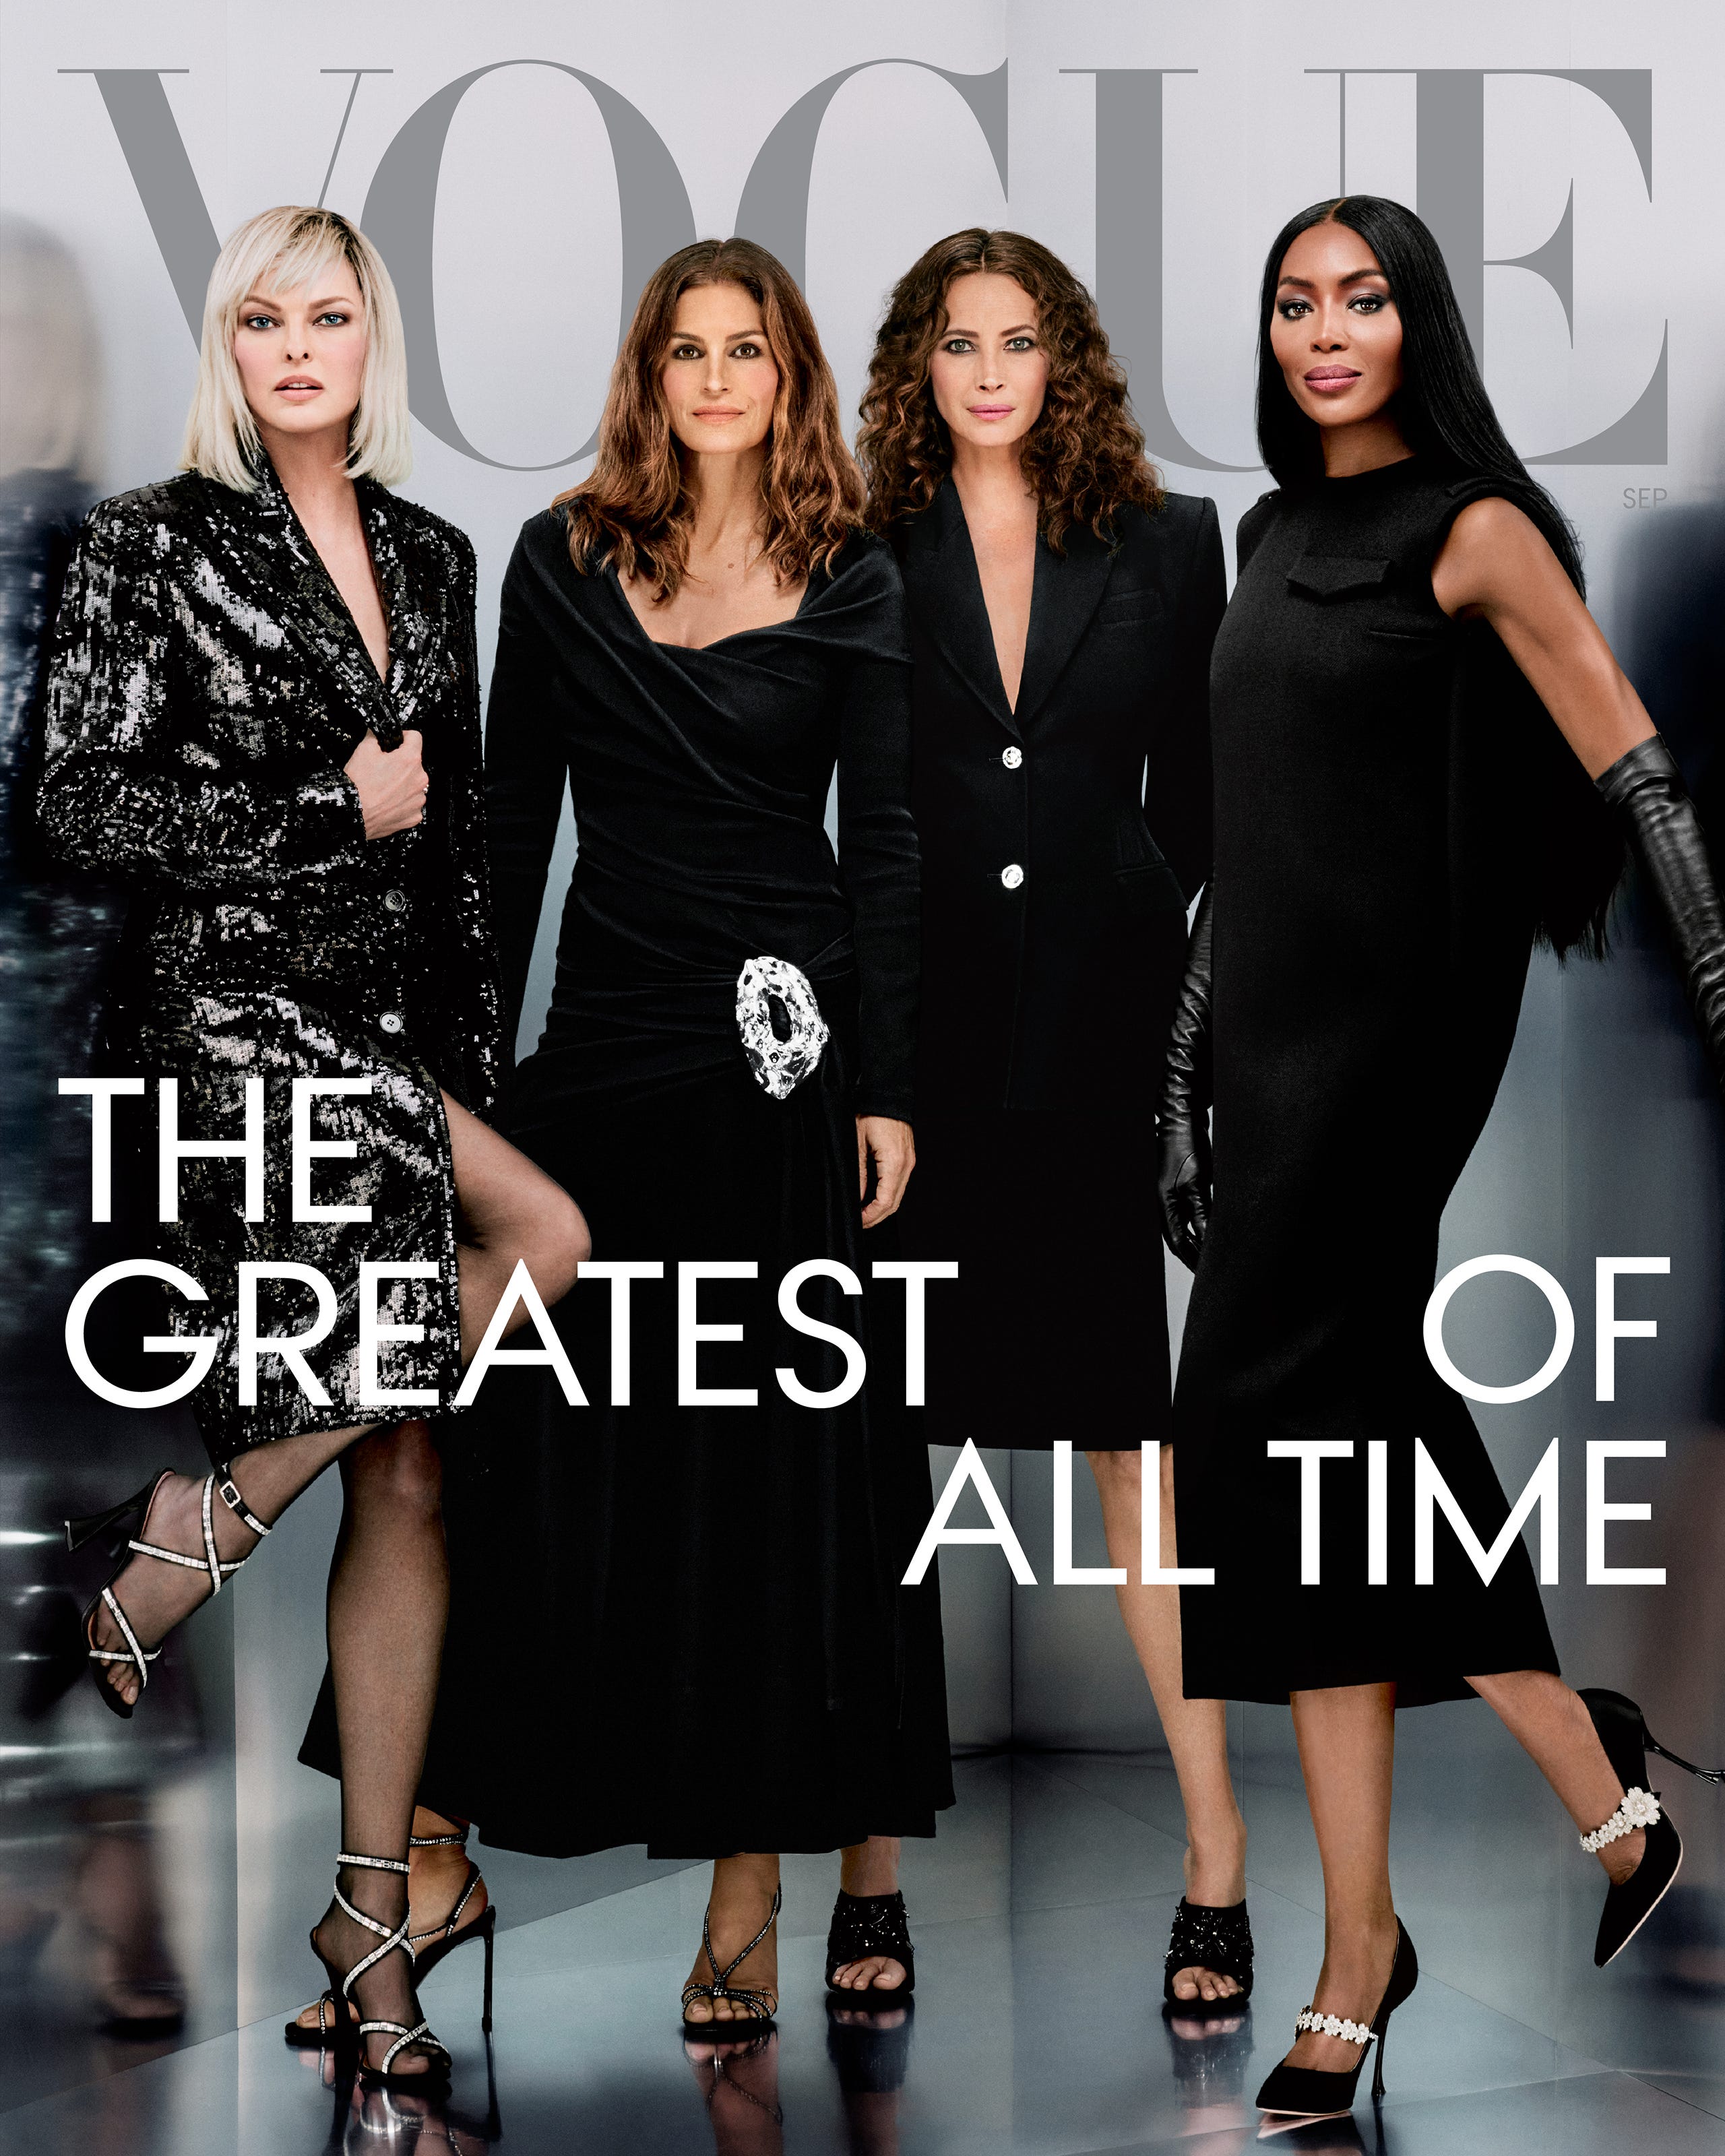 Better Together: A Look Back at Vogue's Best Model Group Covers